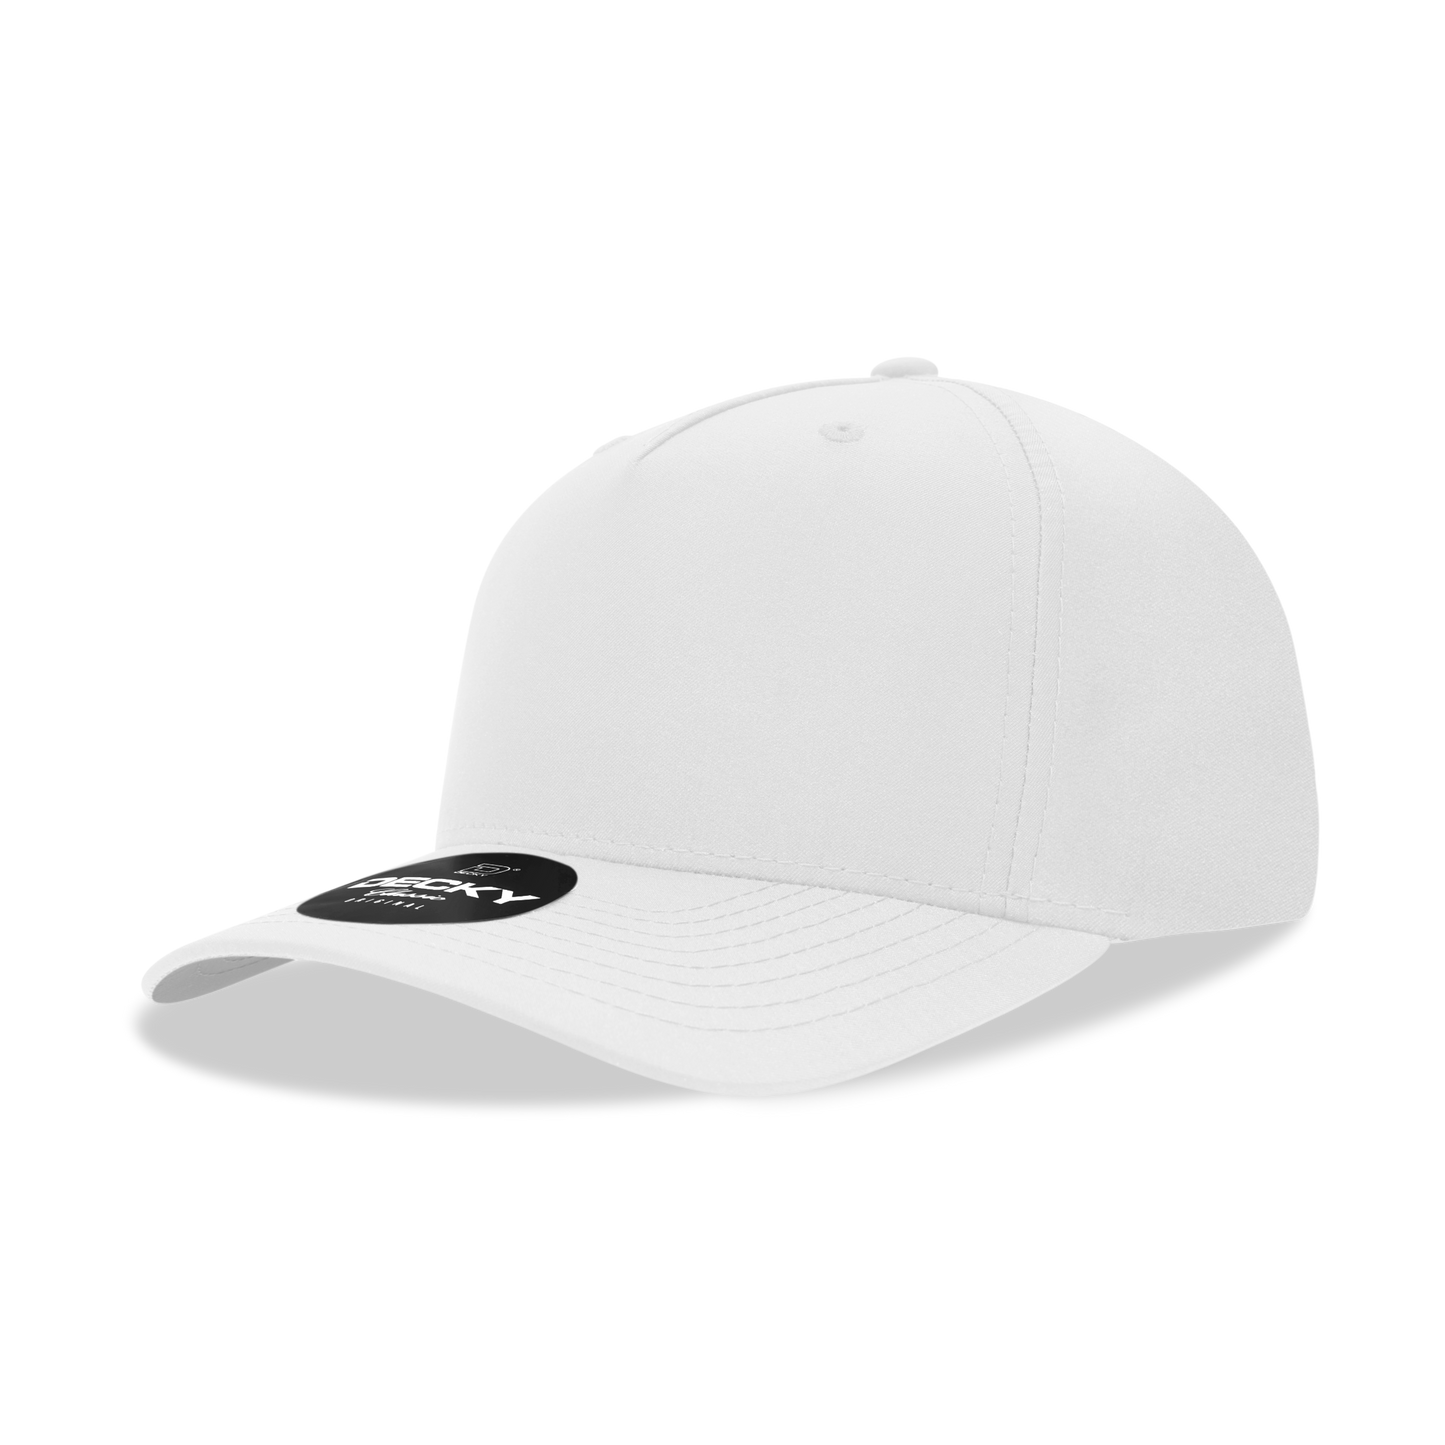 Decky 6221 5 Panel Mid Profile Structured Performance Cap